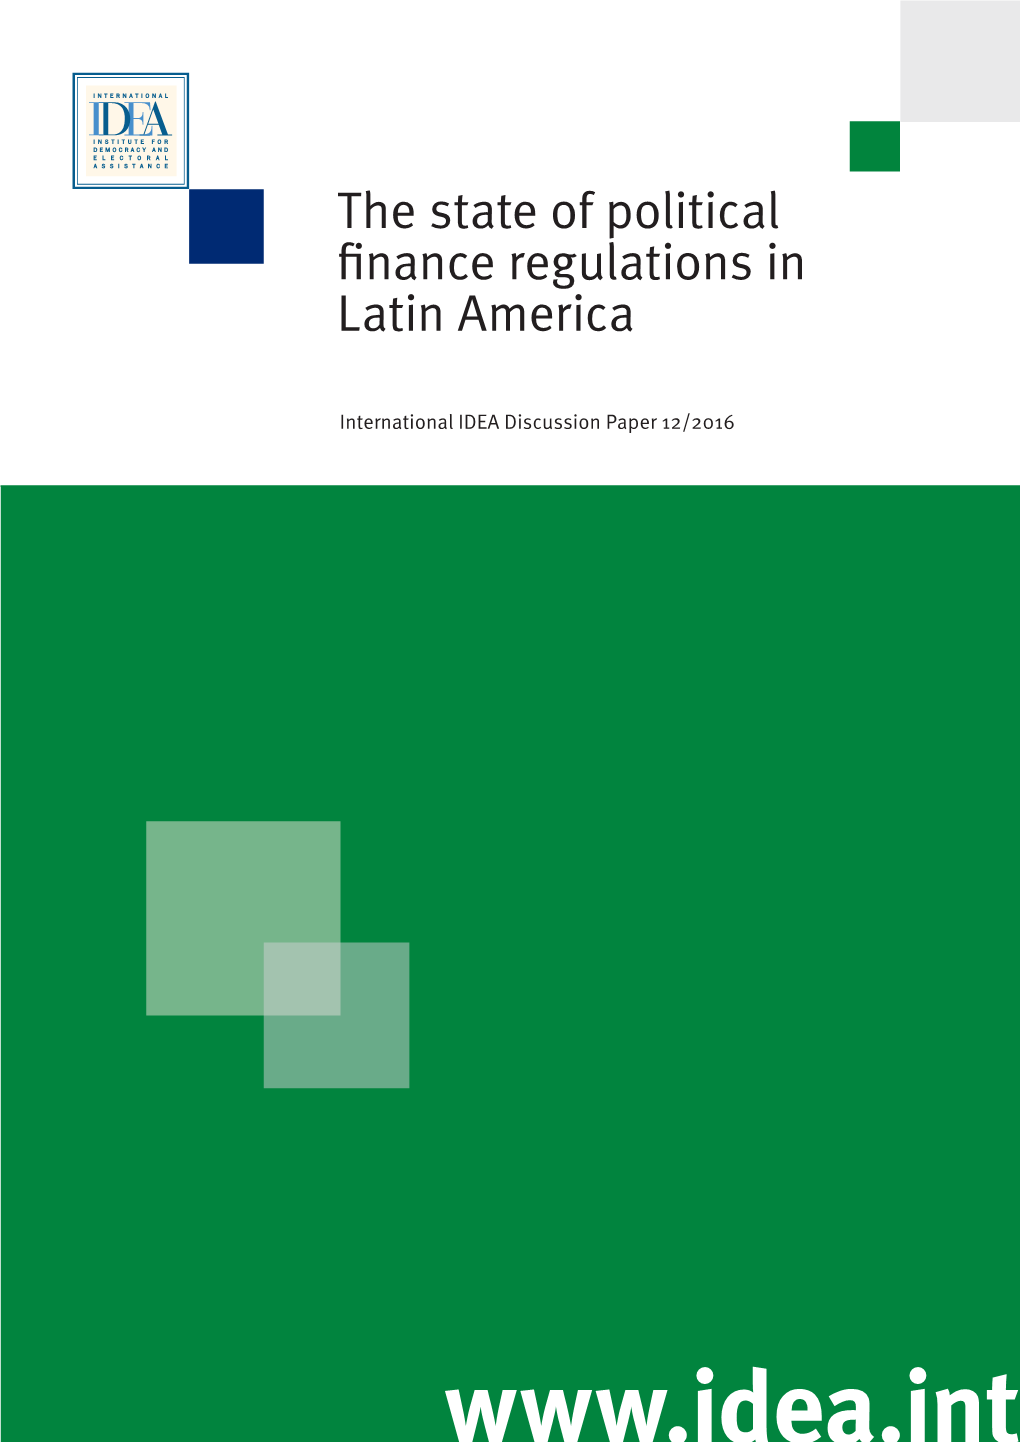 The State of Political Finance Regulations in Latin America